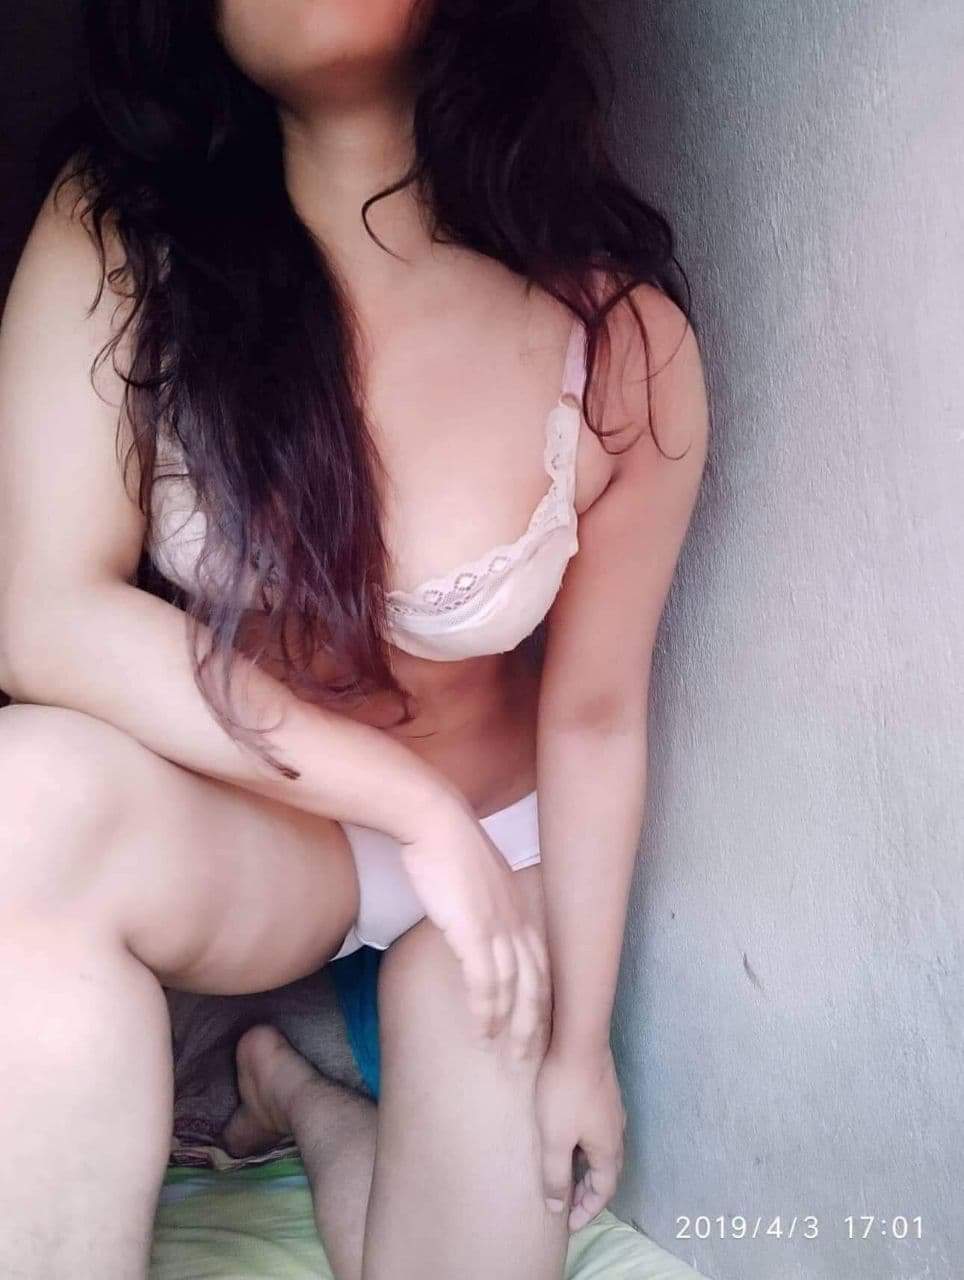 Indian College Galleries - Indian College Girl (18 pictures) - Shooshtime